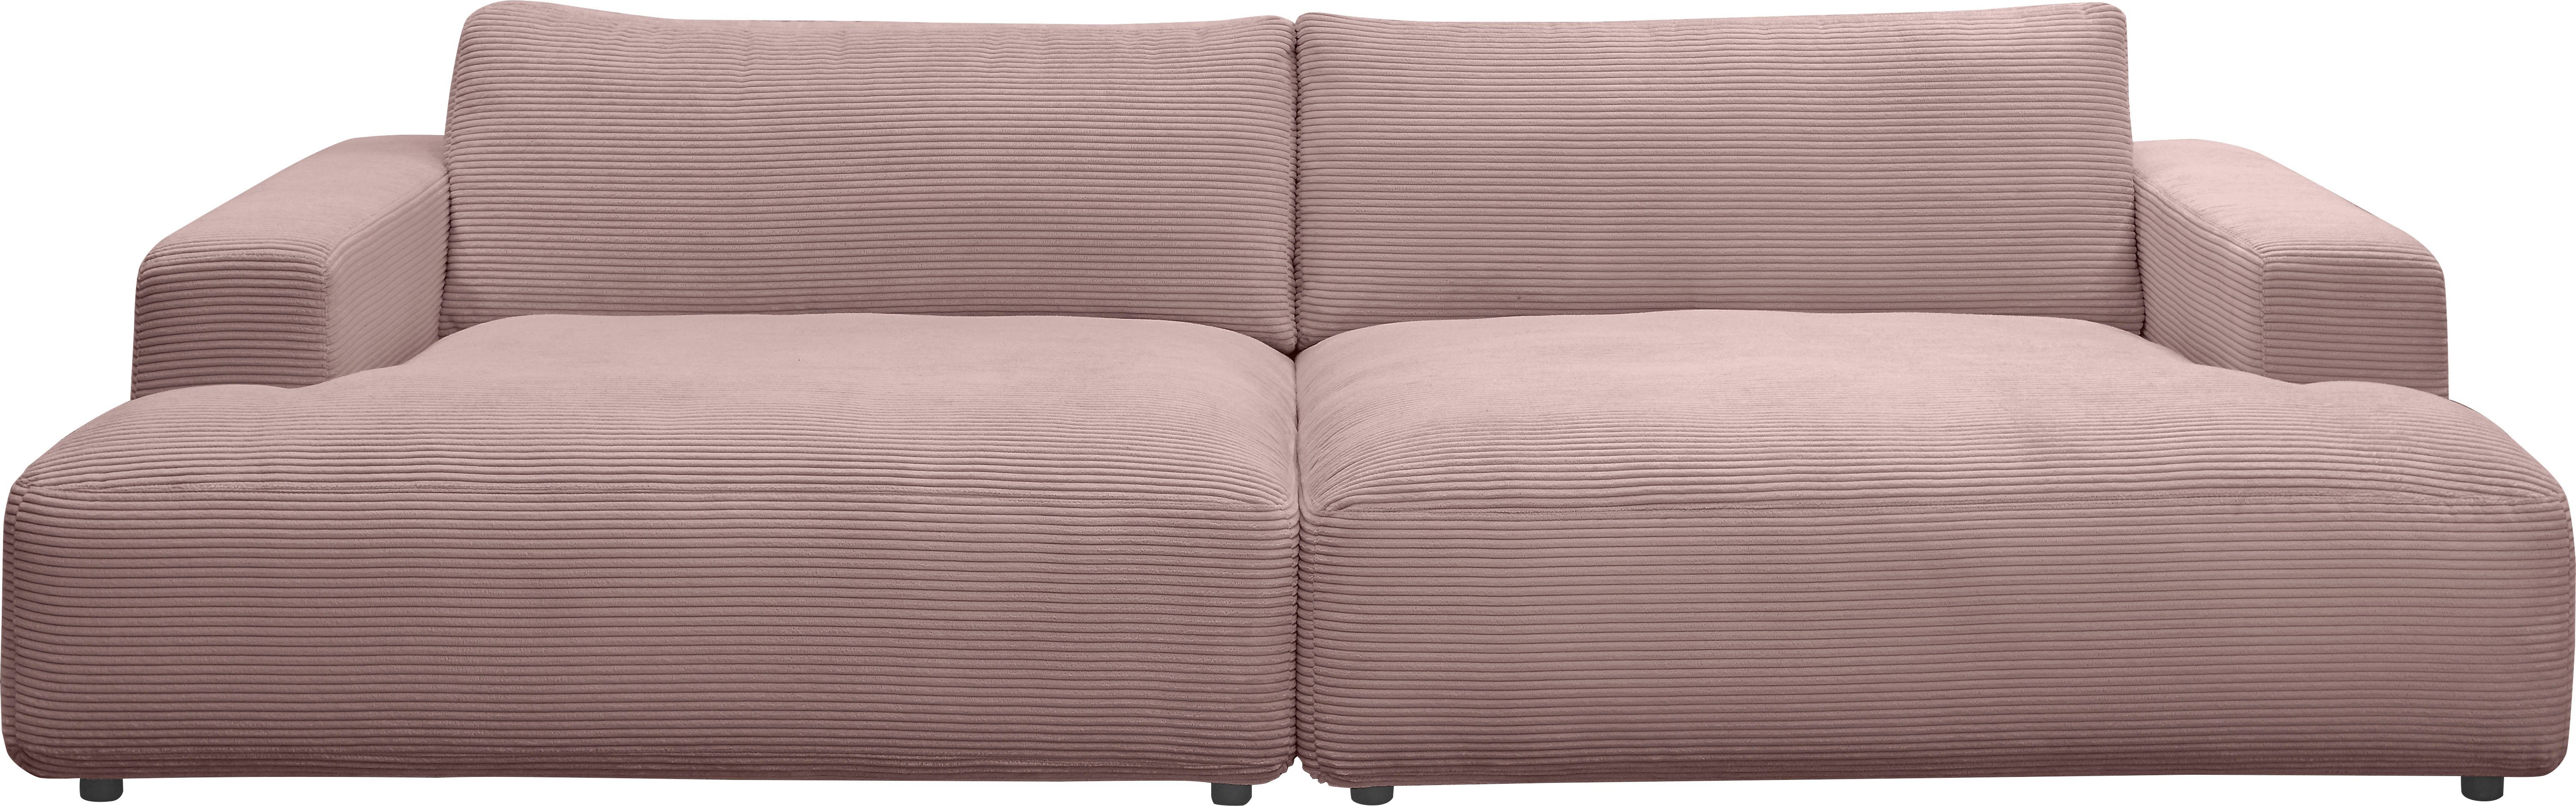 cm rosa Breite M Loungesofa 292 branded Cord-Bezug, GALLERY Lucia, Musterring by